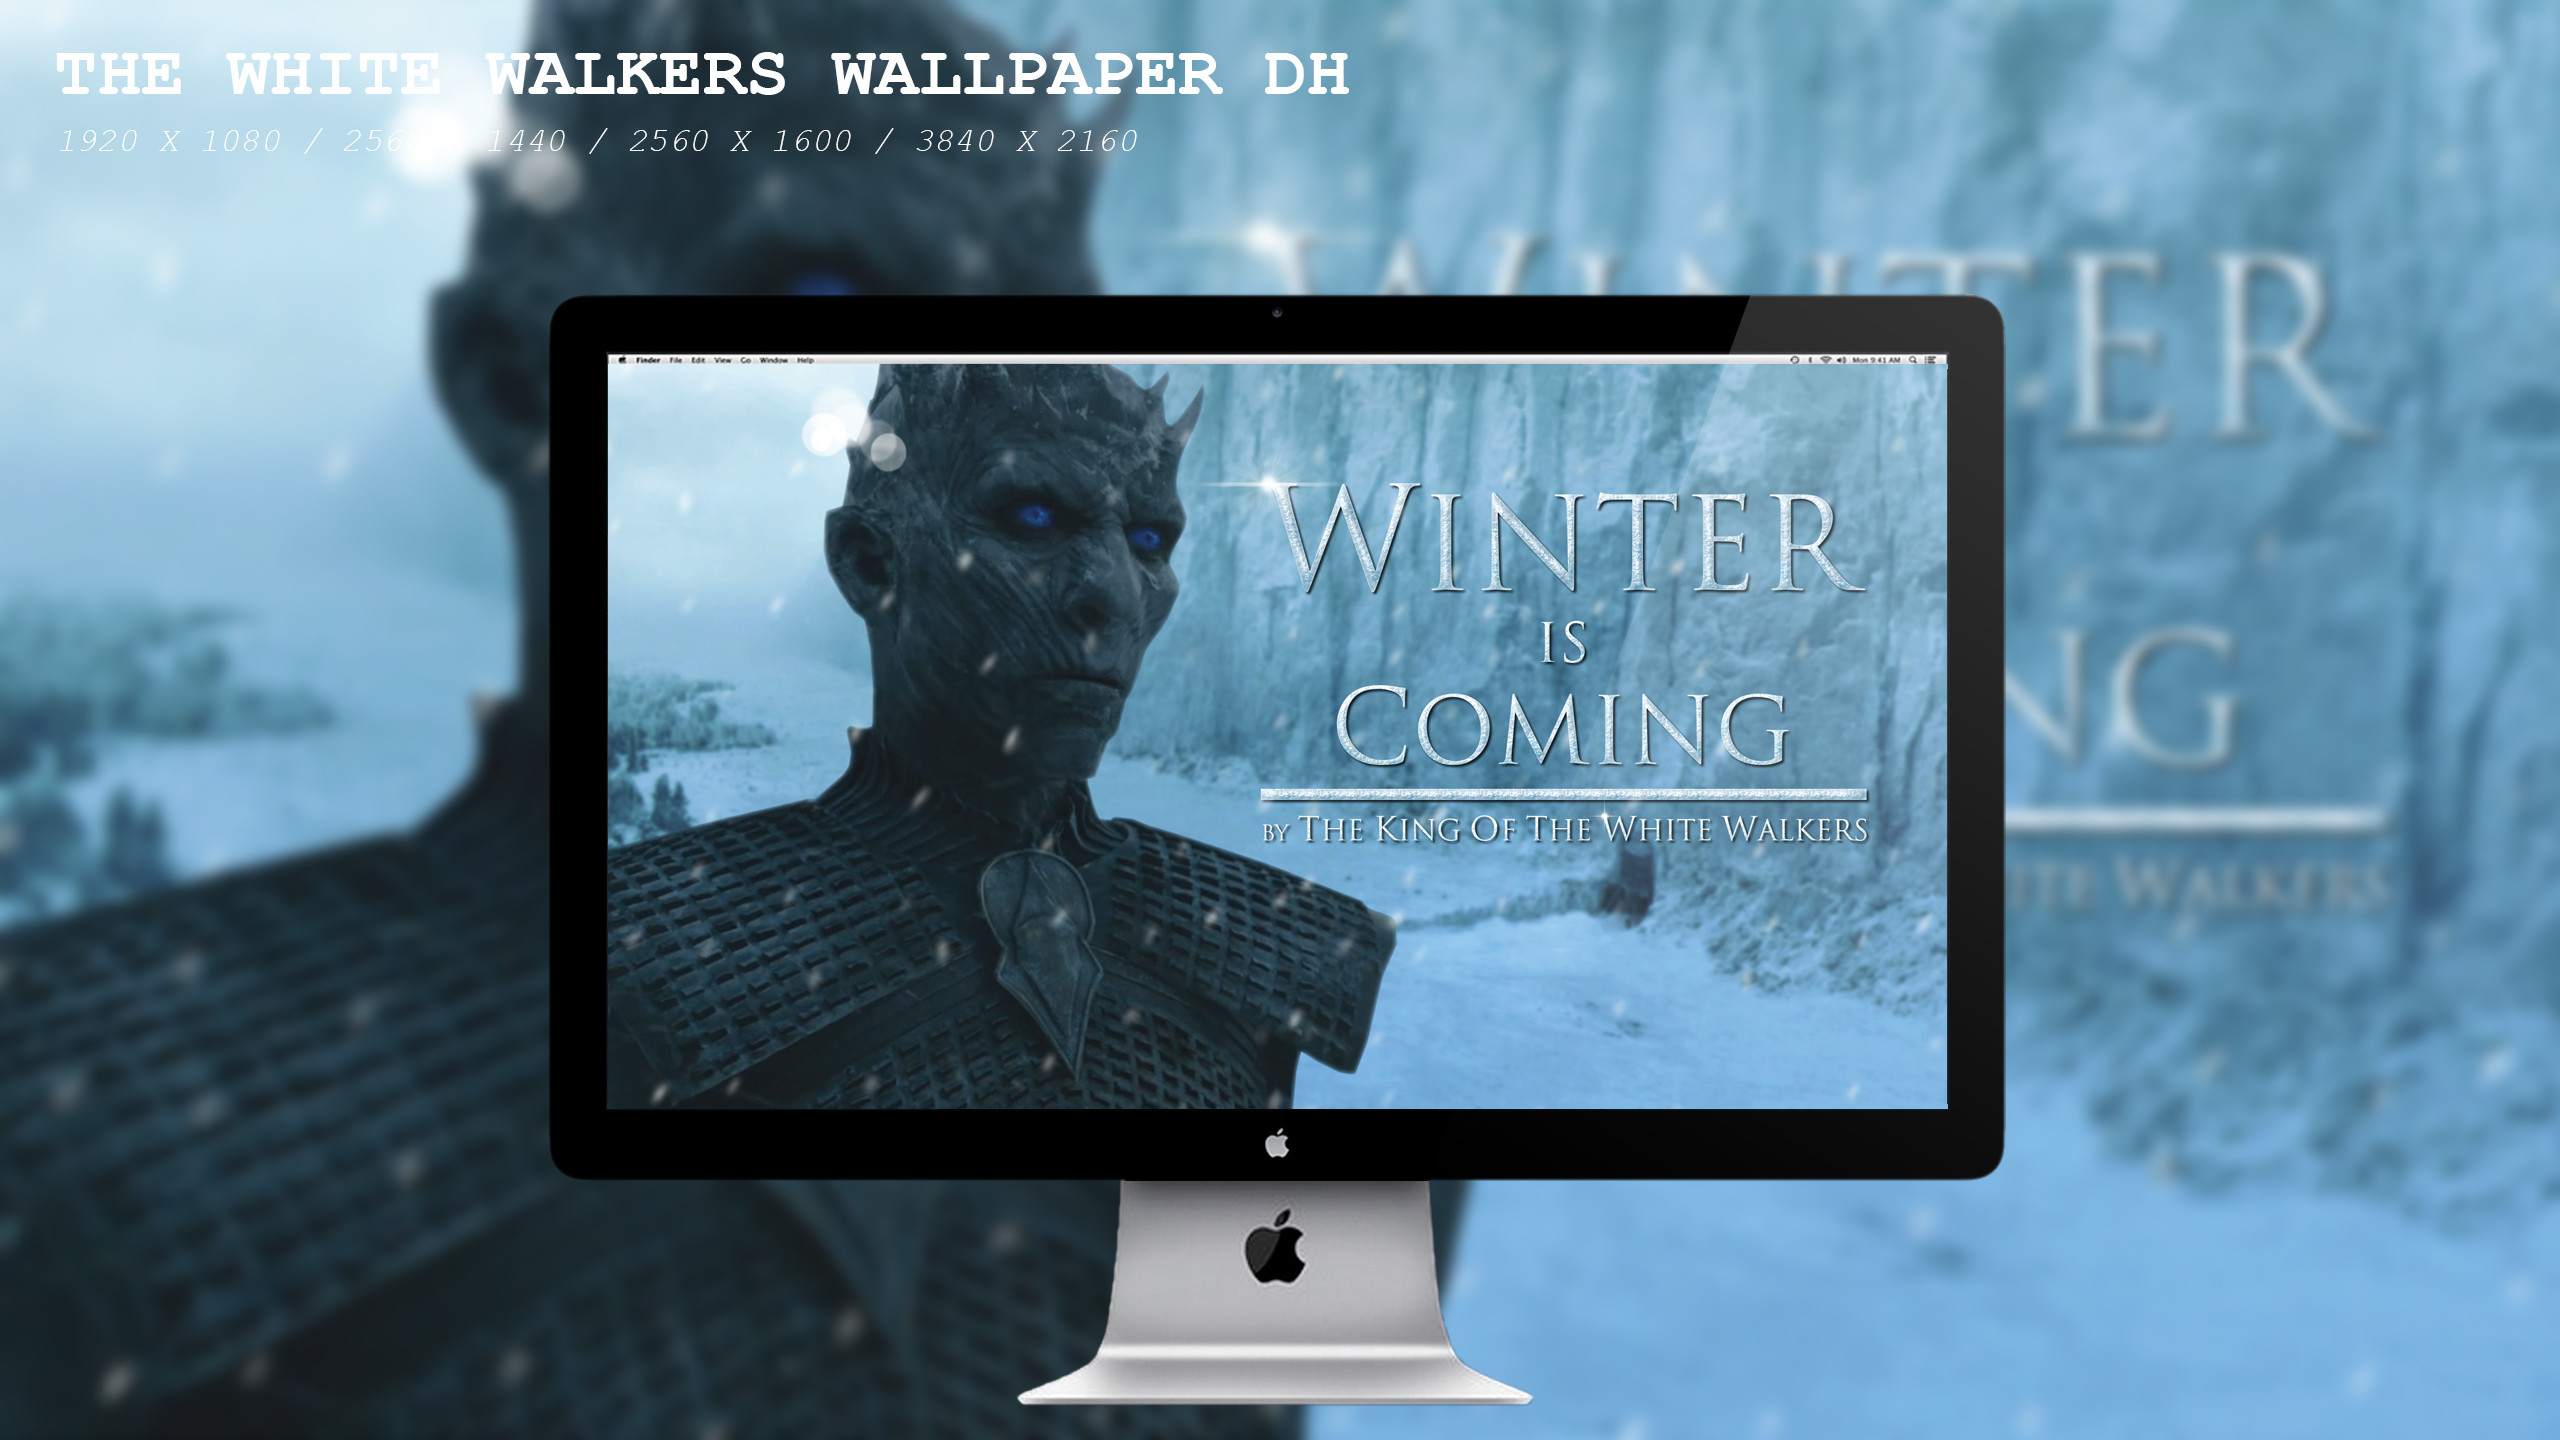 … The White Walkers wallpaper DH by BeAware8